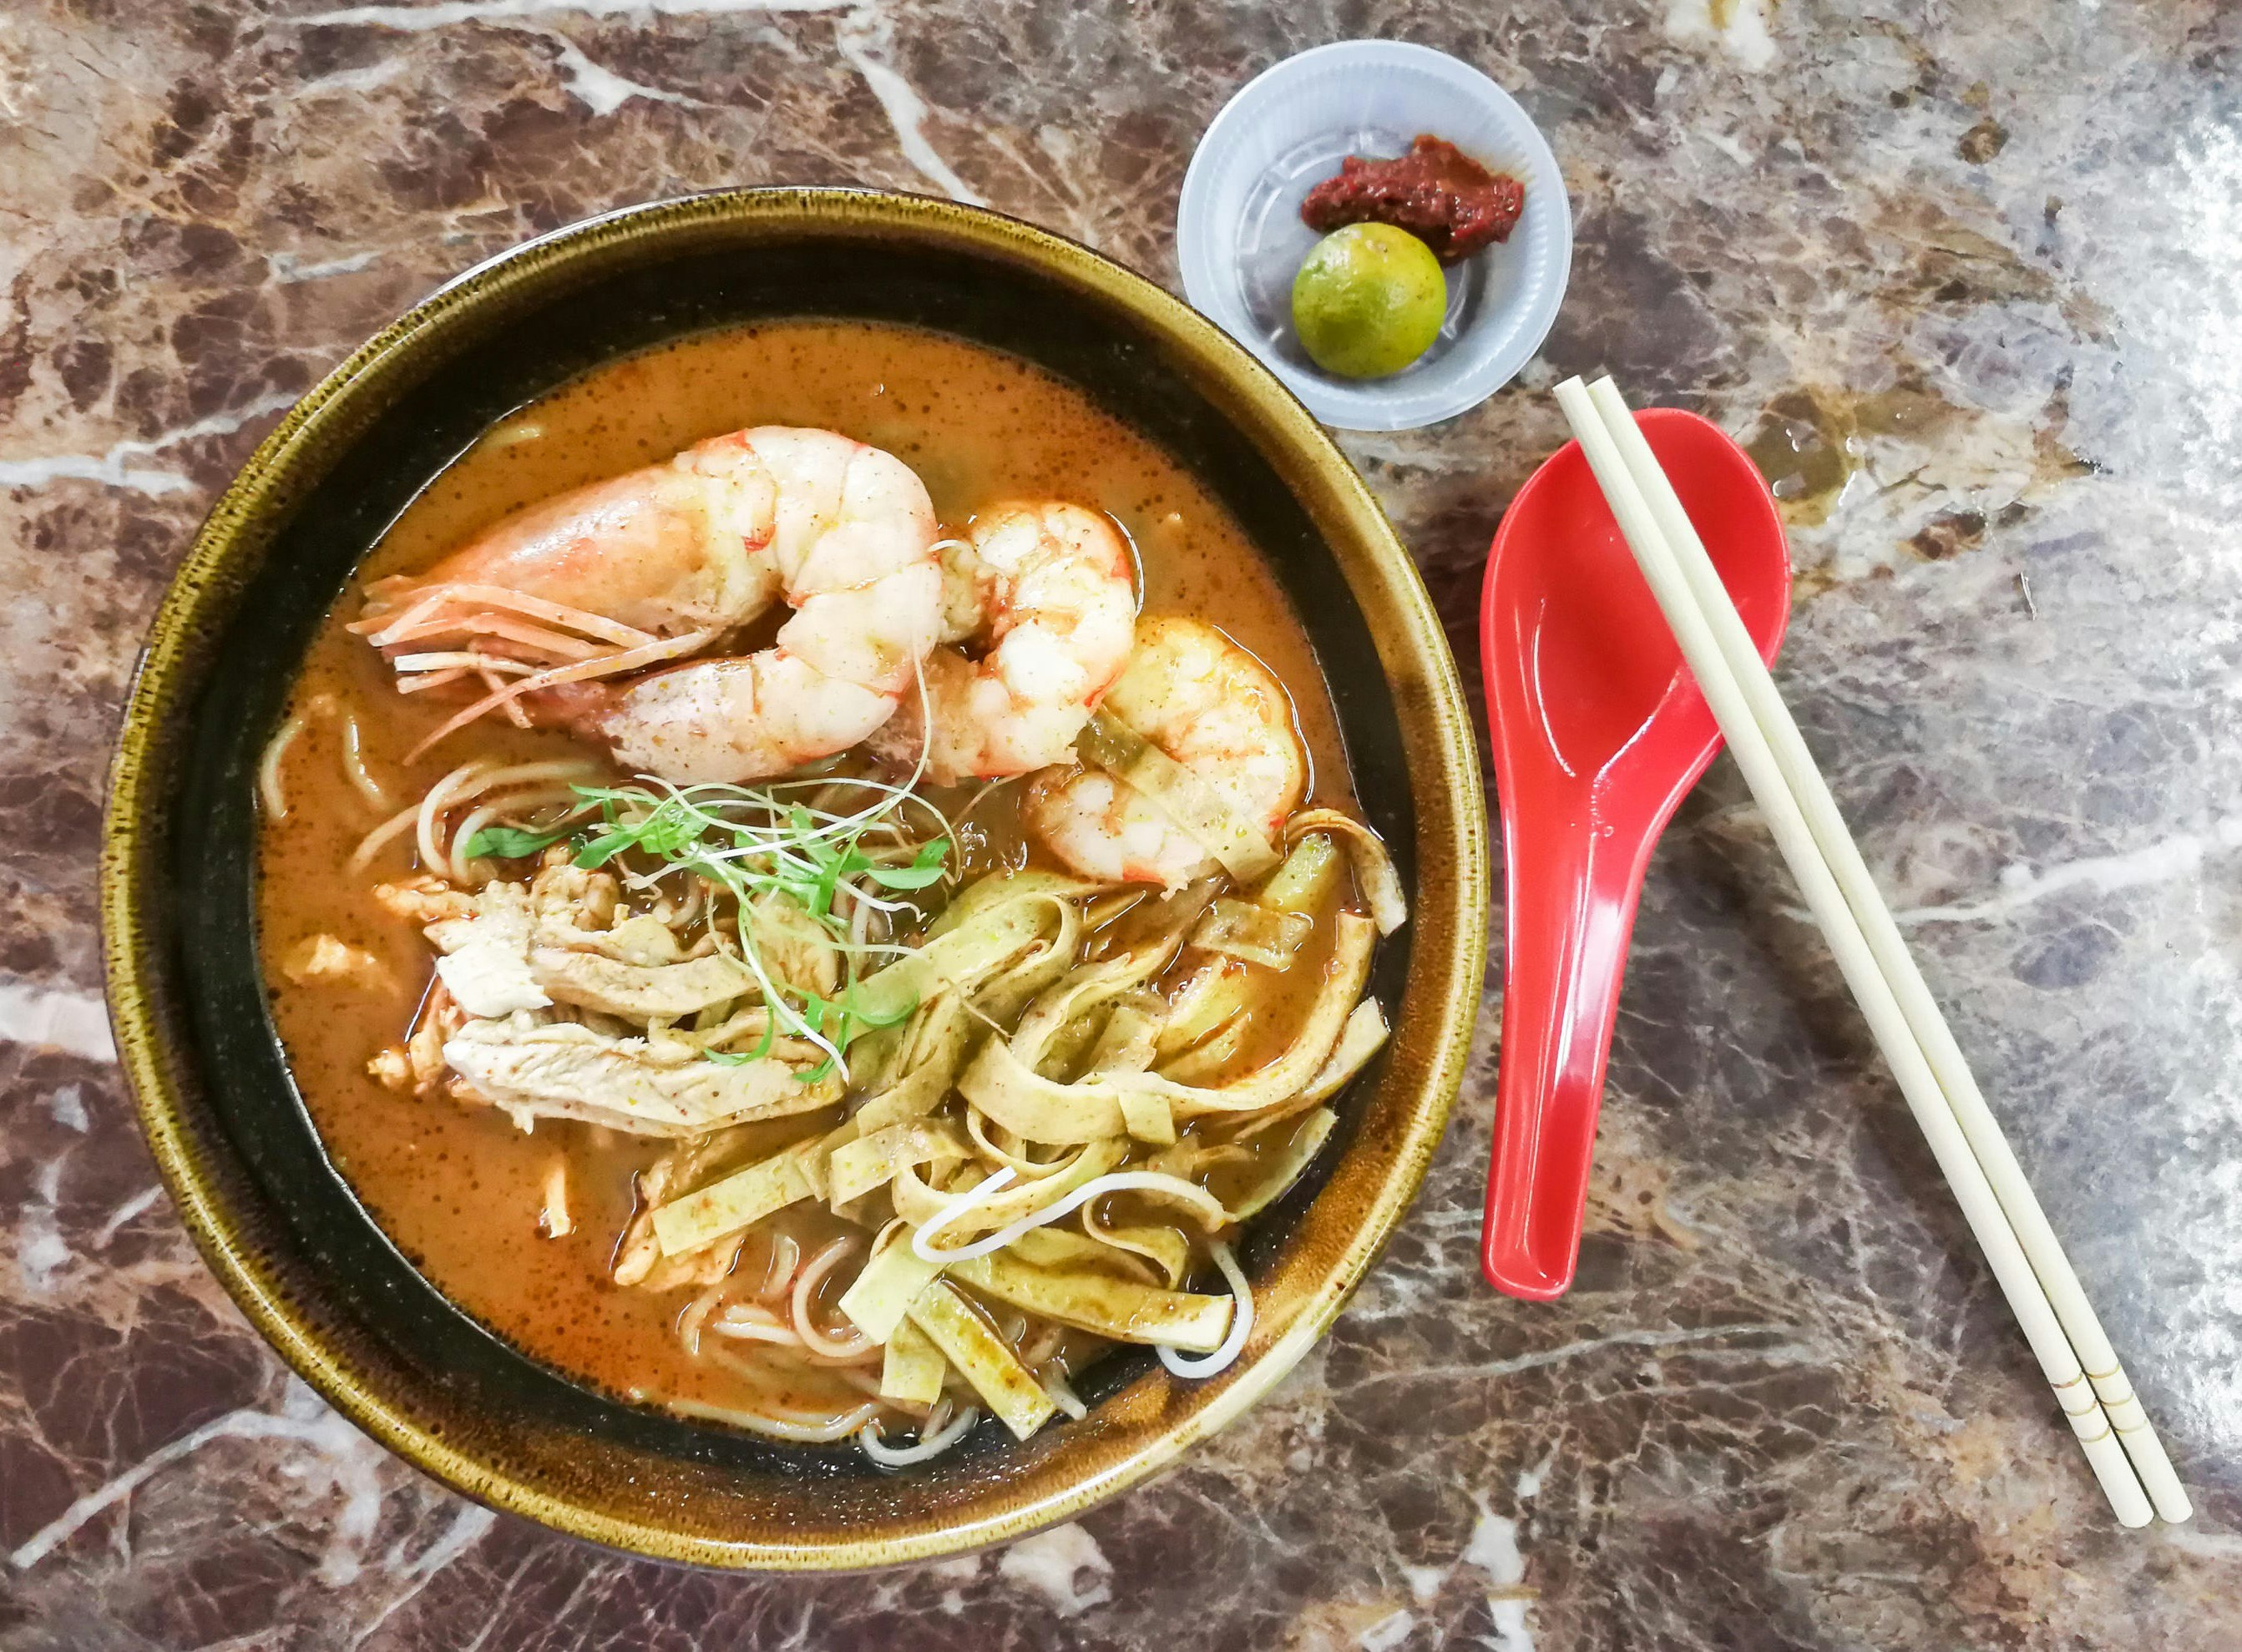 A bowl of Sarawak laksa as seen from directly above. The bowl is filled with a thick broth containing large noodles, strips of chickens and prawns.